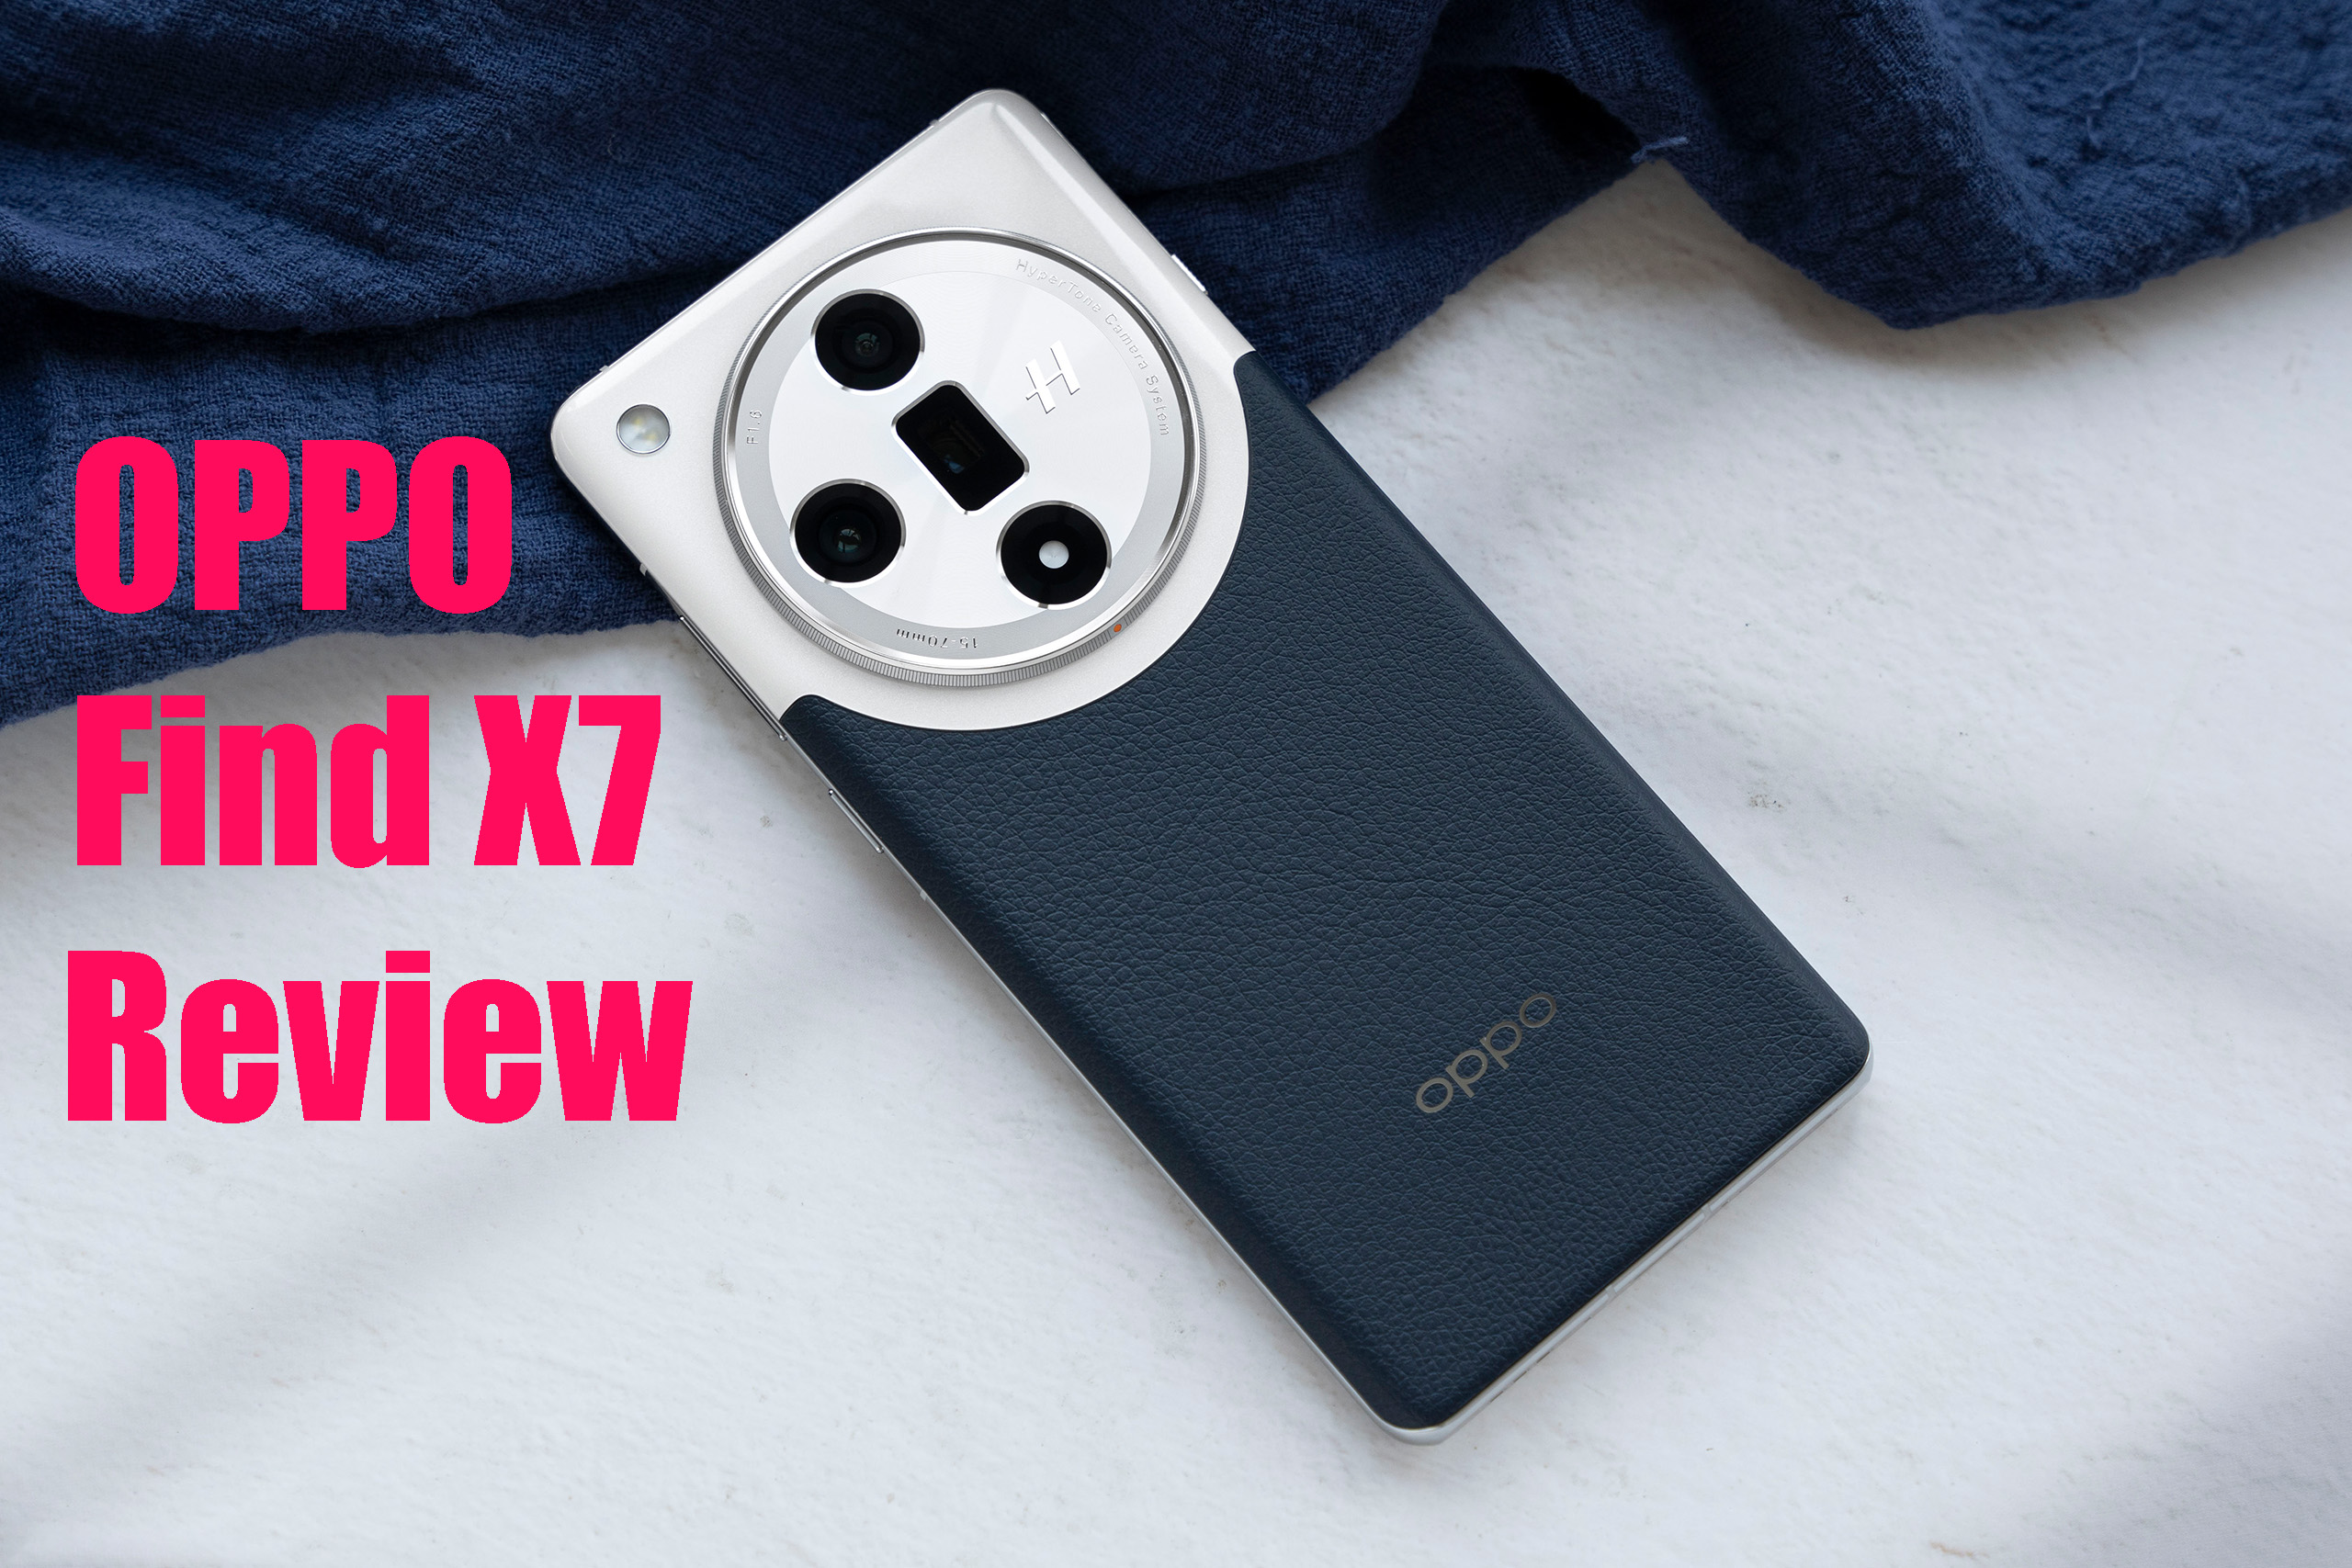 OPPO Find X7 Review